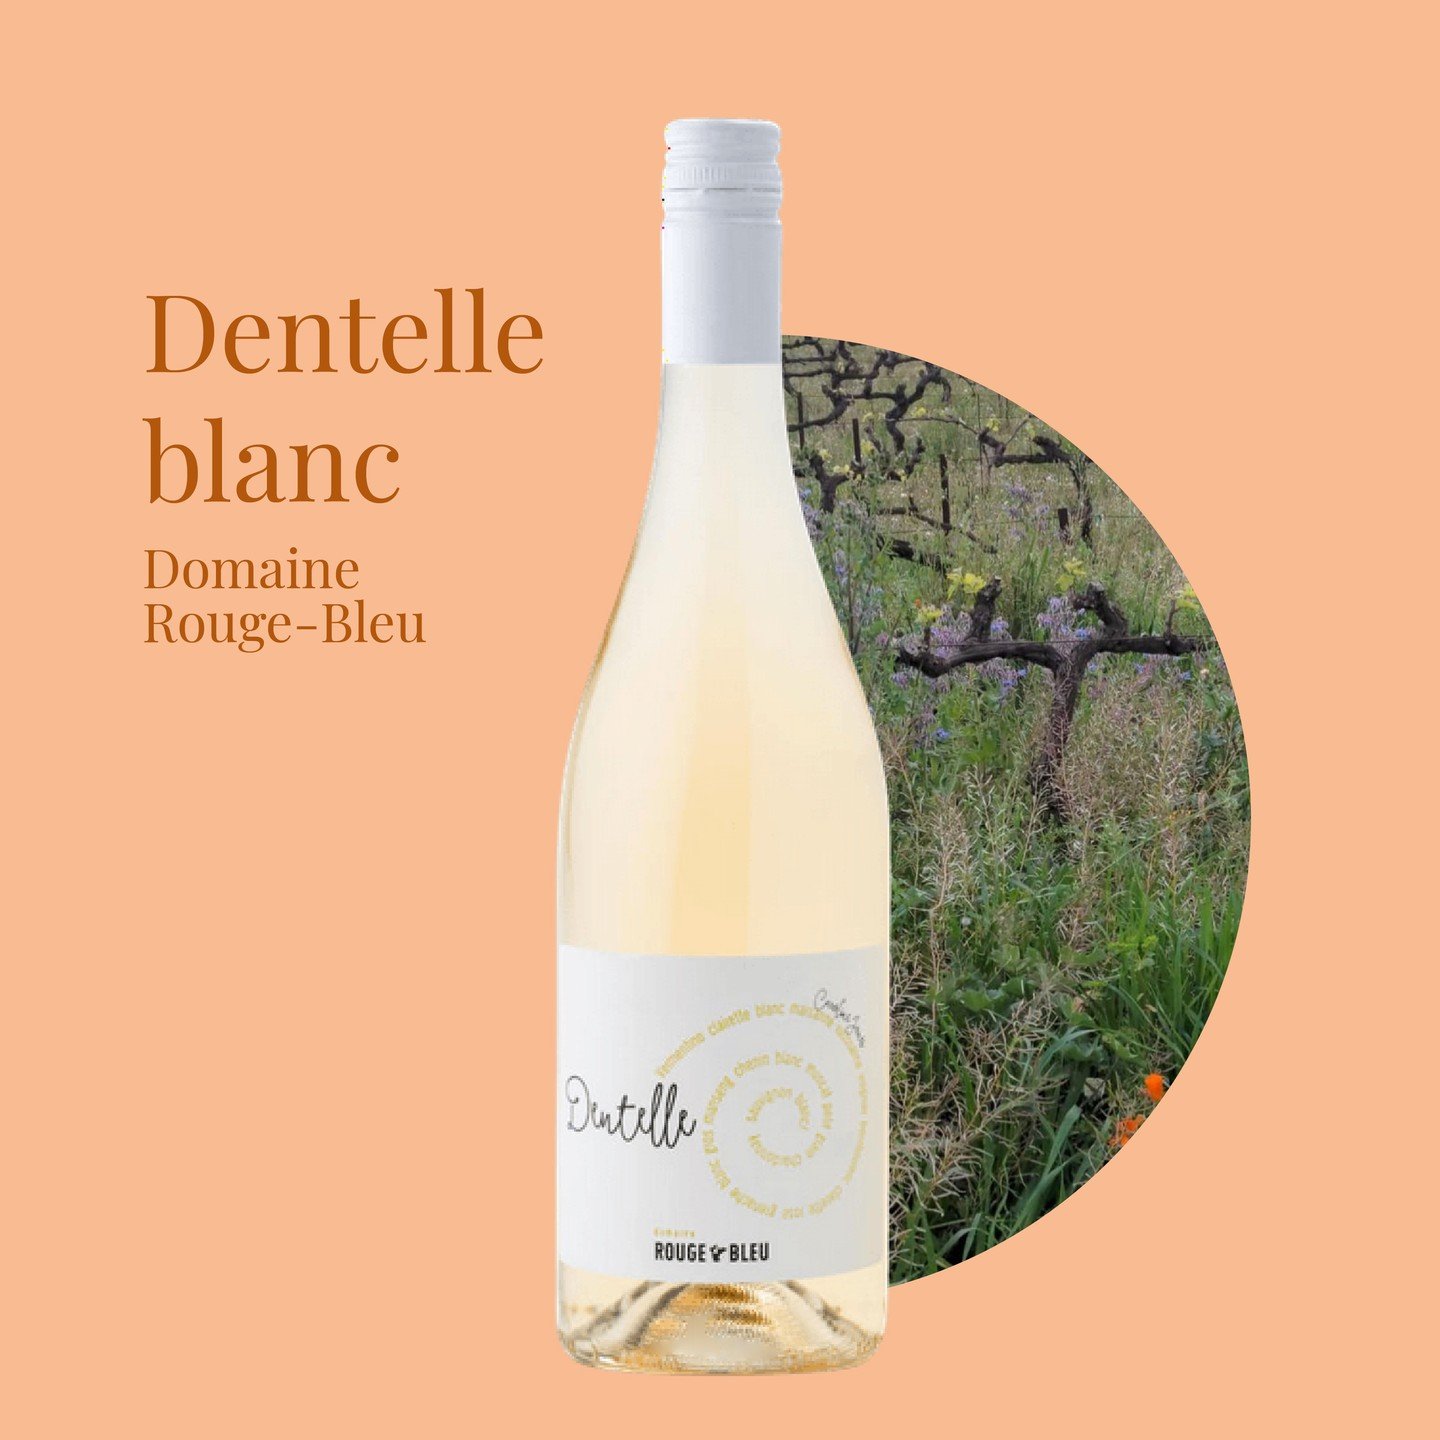 Dentelle blanc , a blend of 13 local grape varietals from the southern Rhone. Aromatic notes of apricot with tropical hints. Crisp acidity with stone fruit flavors filling the mid palate. 

Winemaker: Domaine Rouge Bleu
Origin: Rhone, France

#happyh